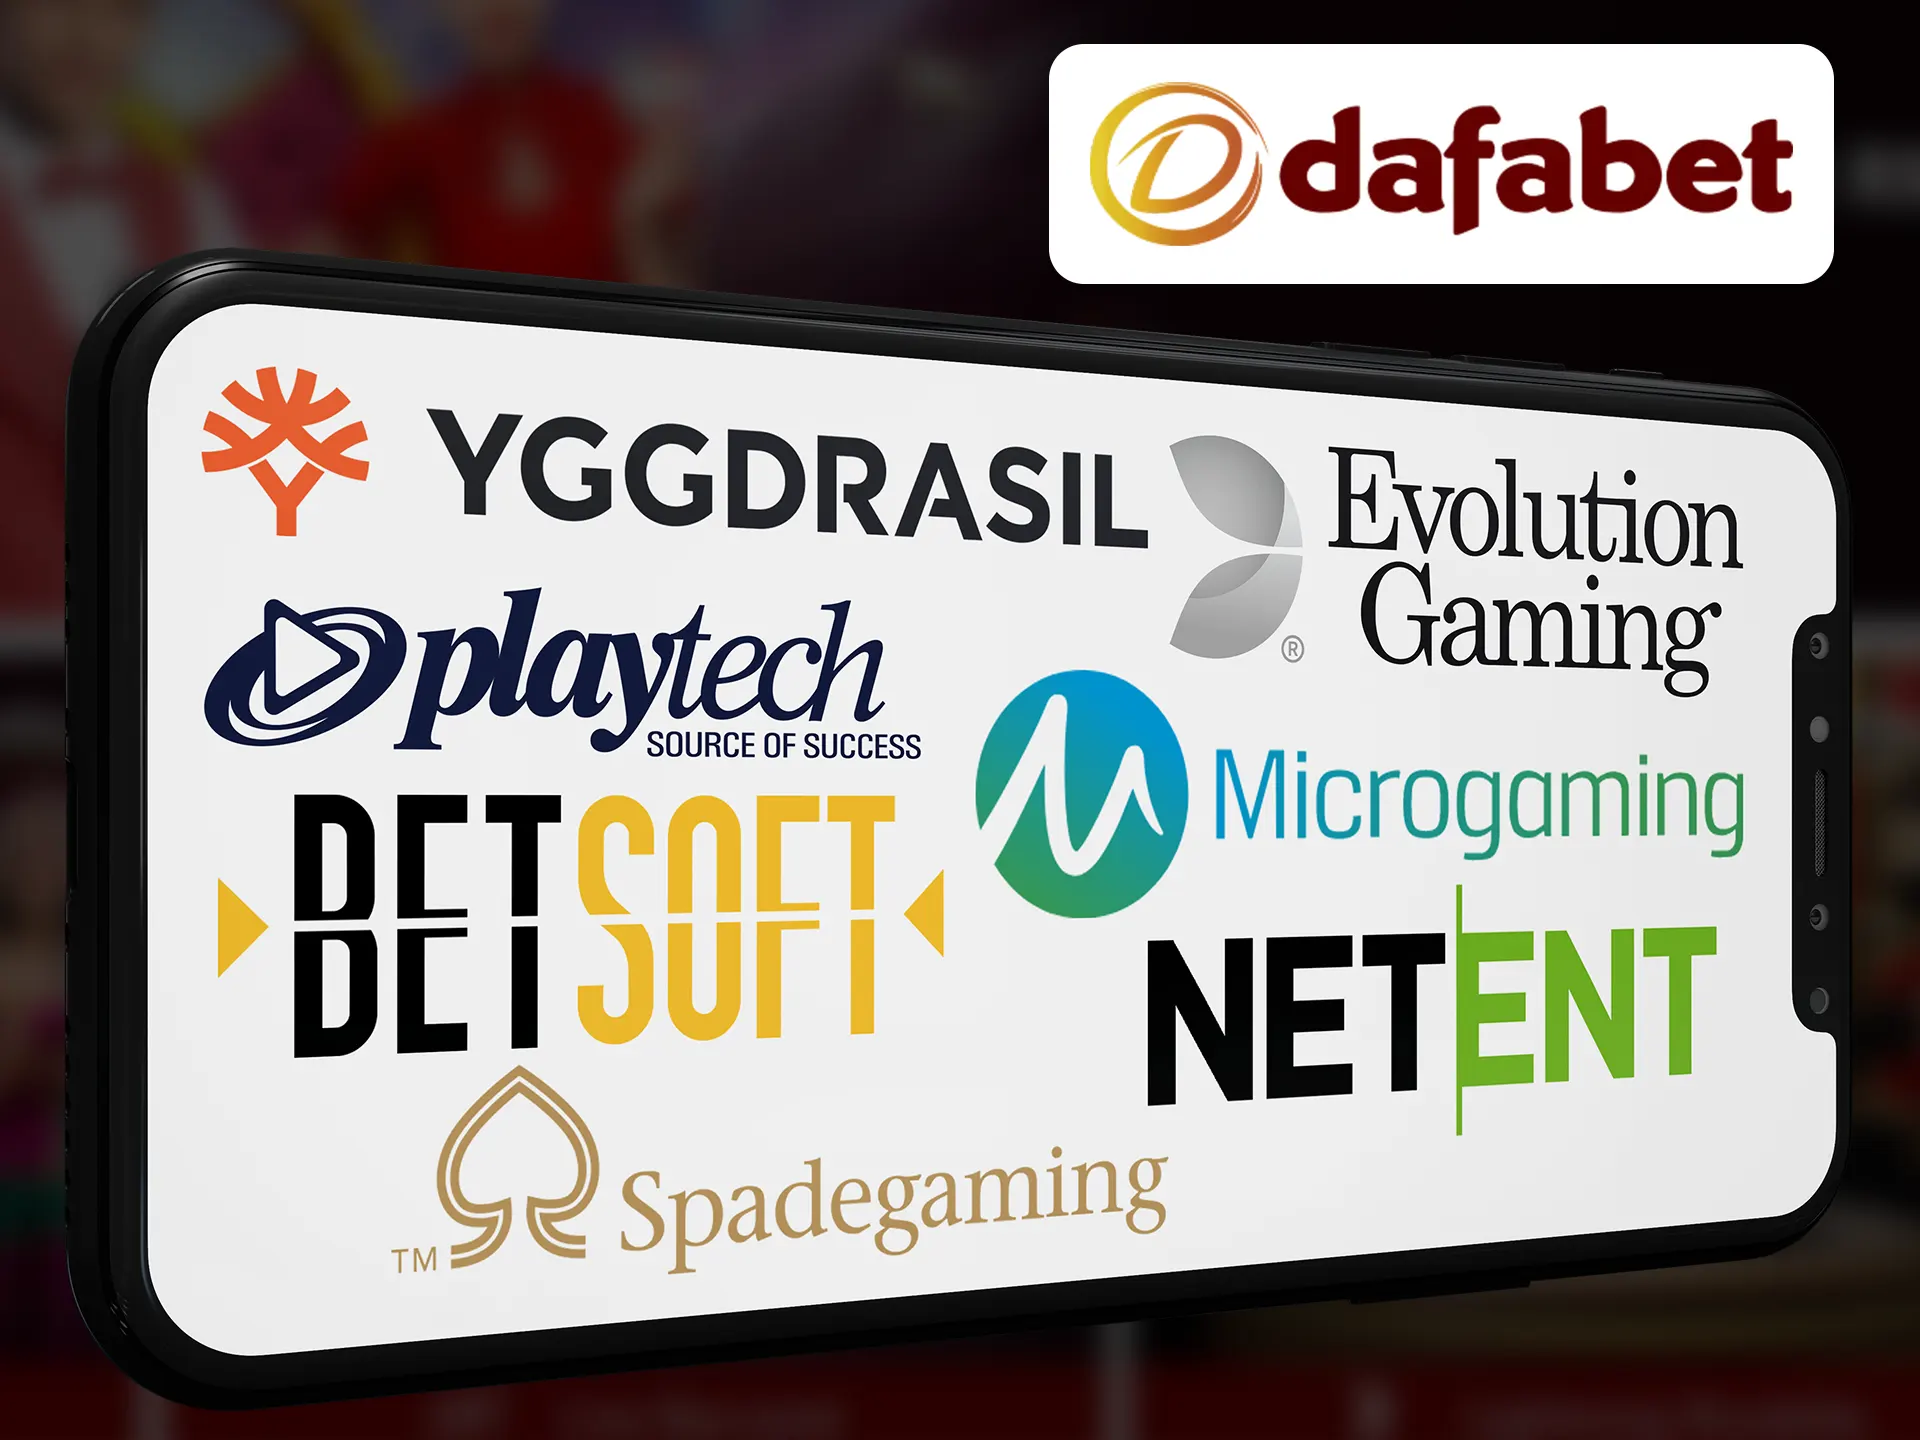 Check for games from your favourite providers at Dafabet.